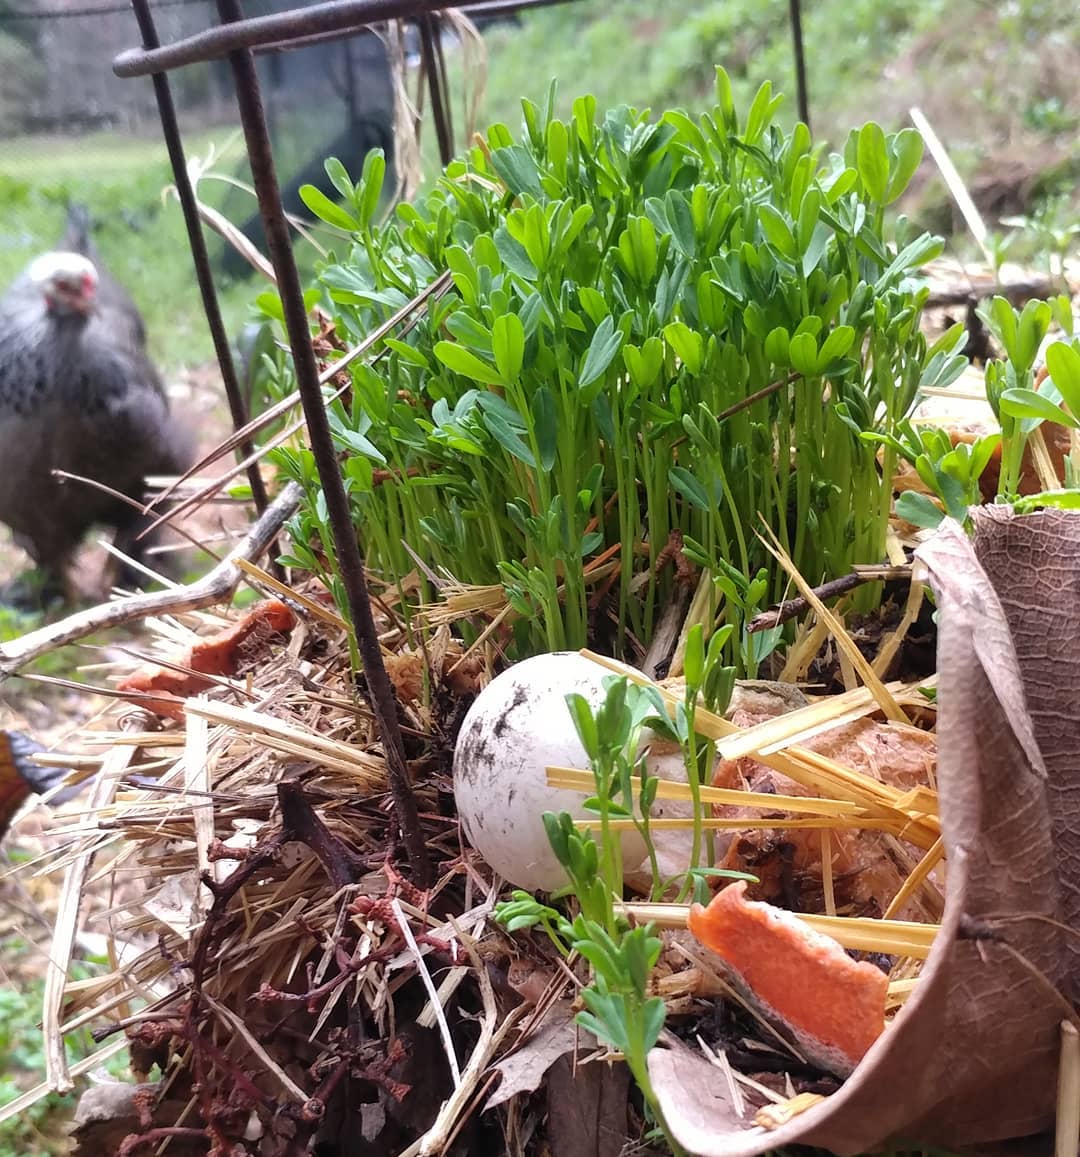 Something very ambitious has sprouted out of the compost pile. I don't know what it is but Vi is coming by to conduct testing. Testing = Eating.